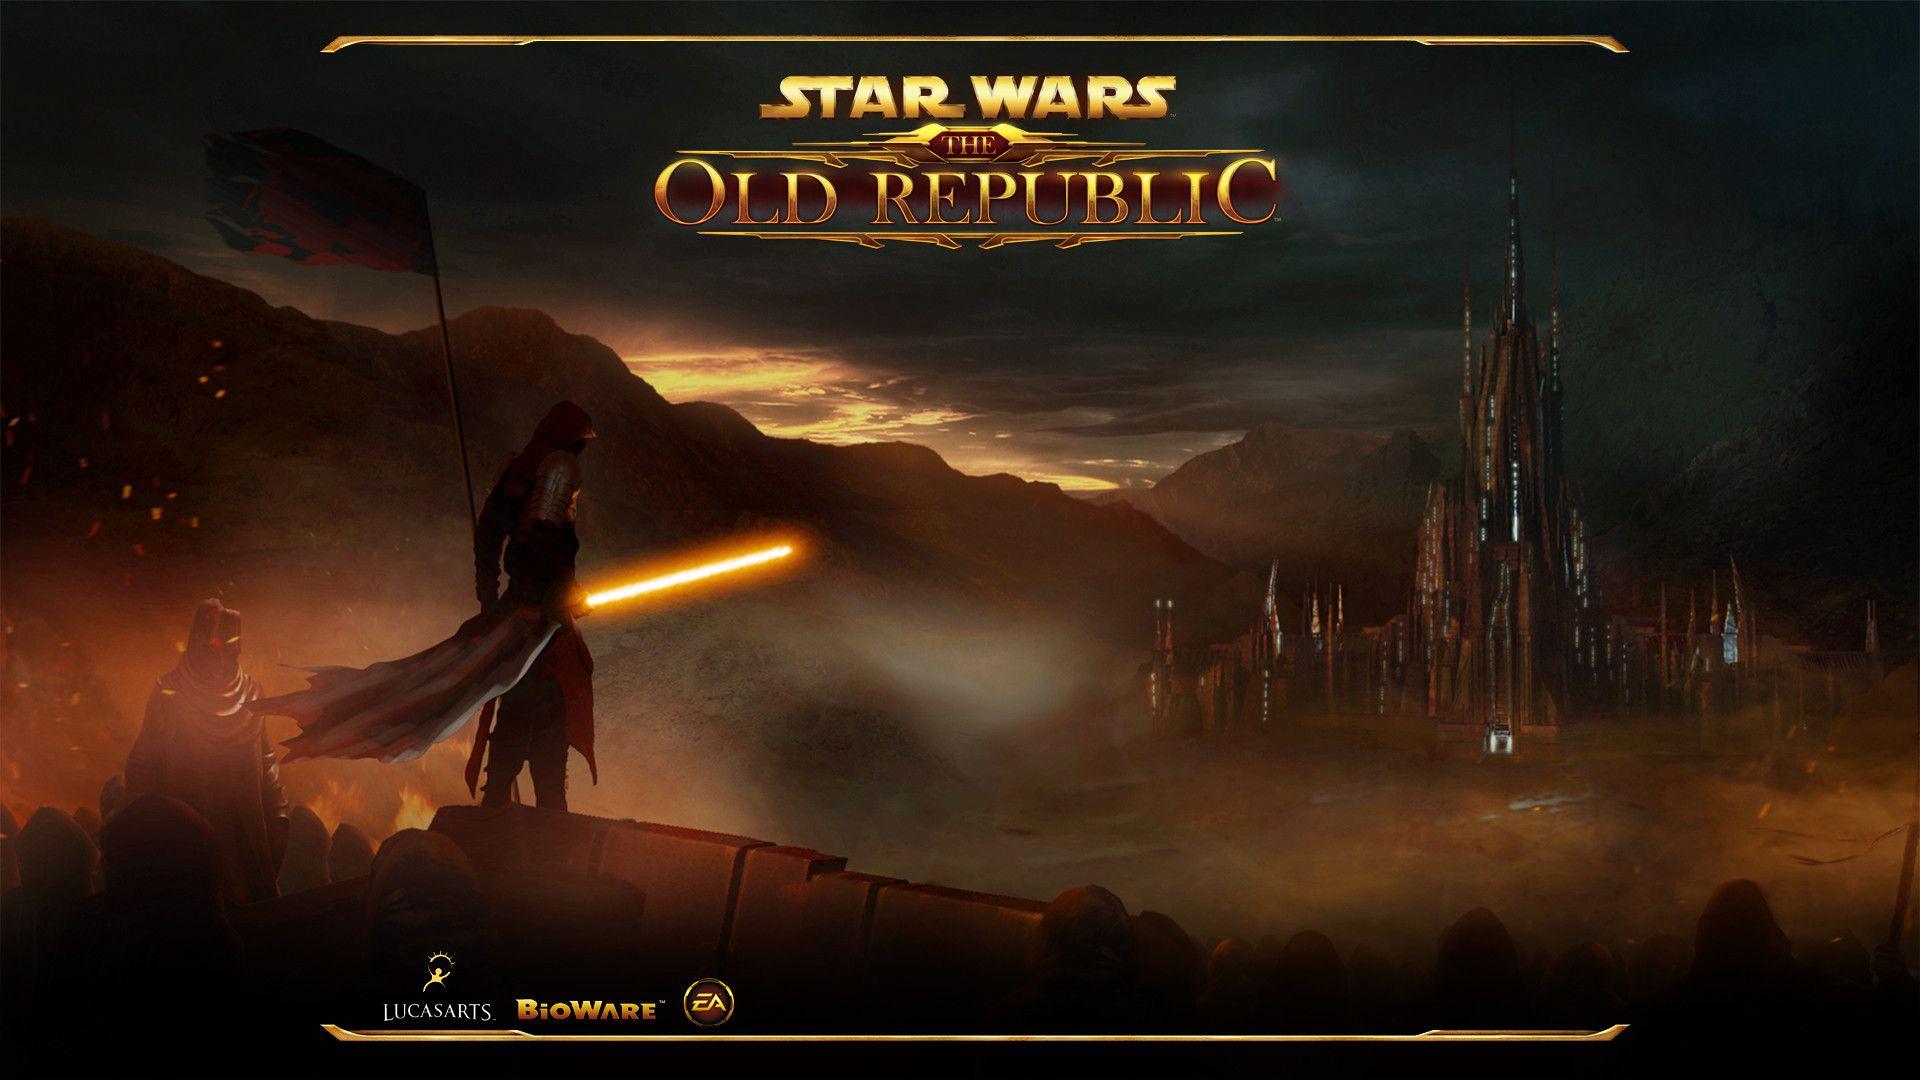 Put some picture together to make a custom SWTOR loading screen